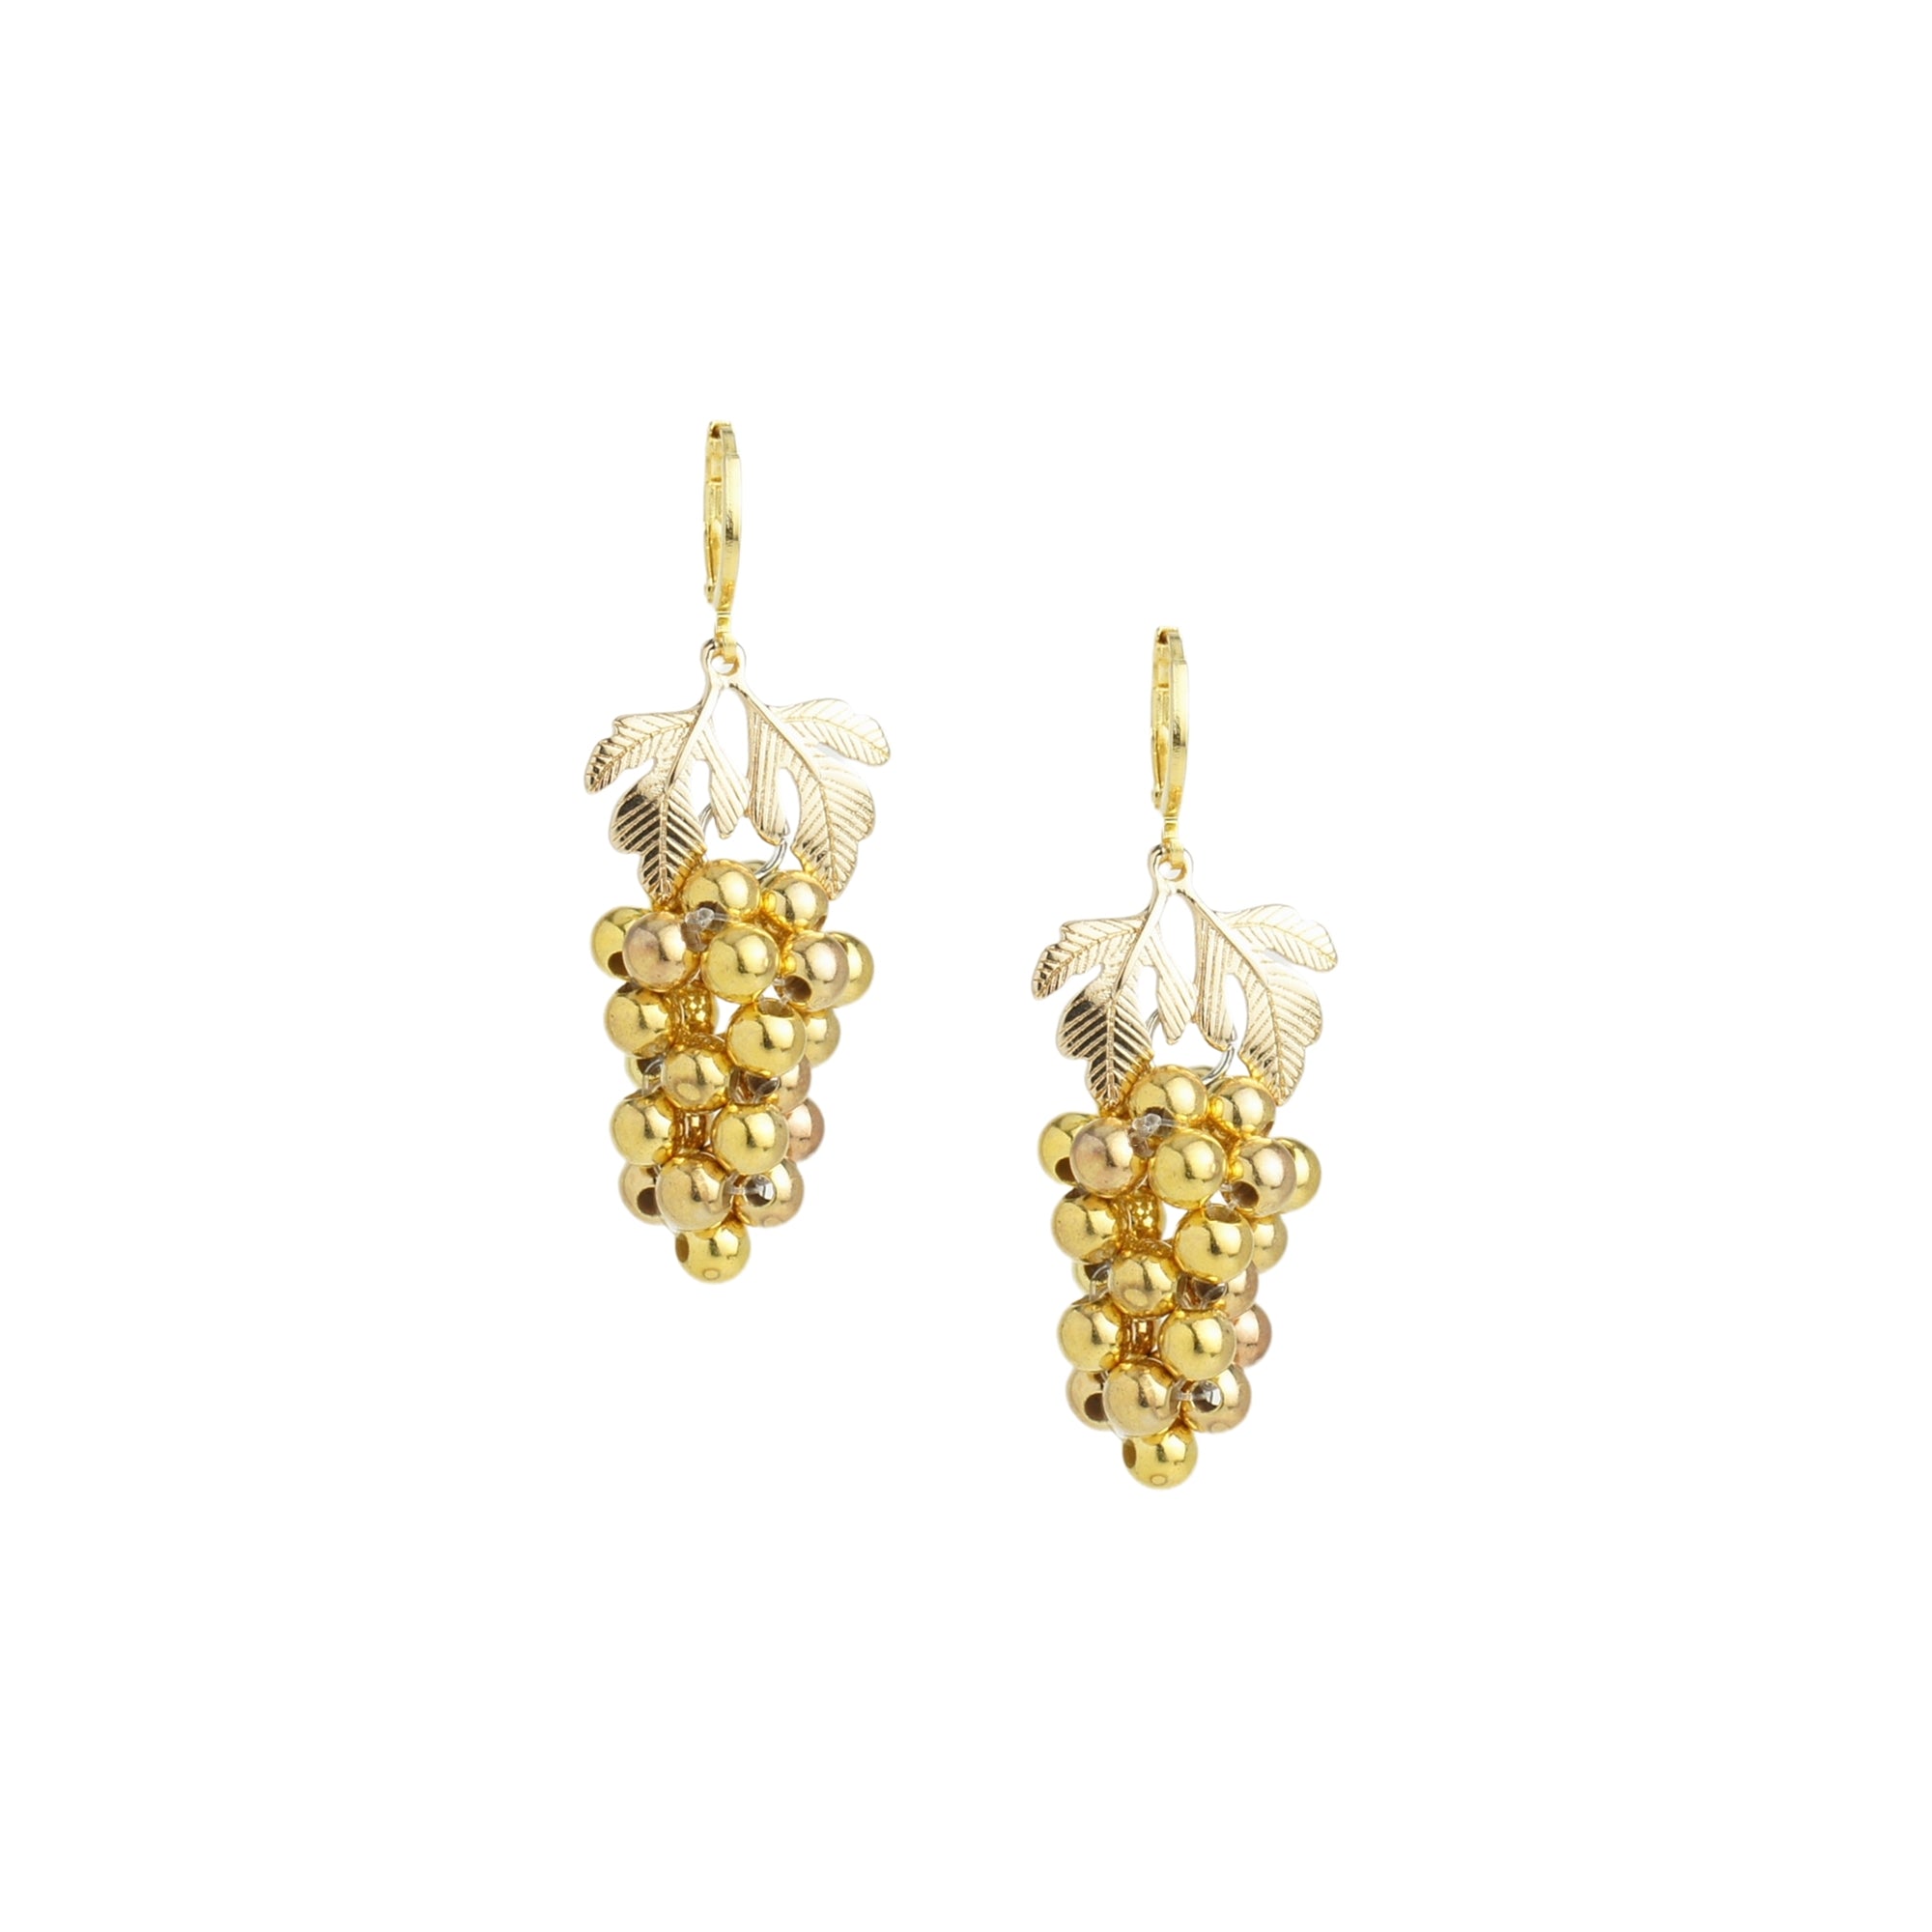 Very Grapeful Metallic Grape Earrings with Golden Leaves